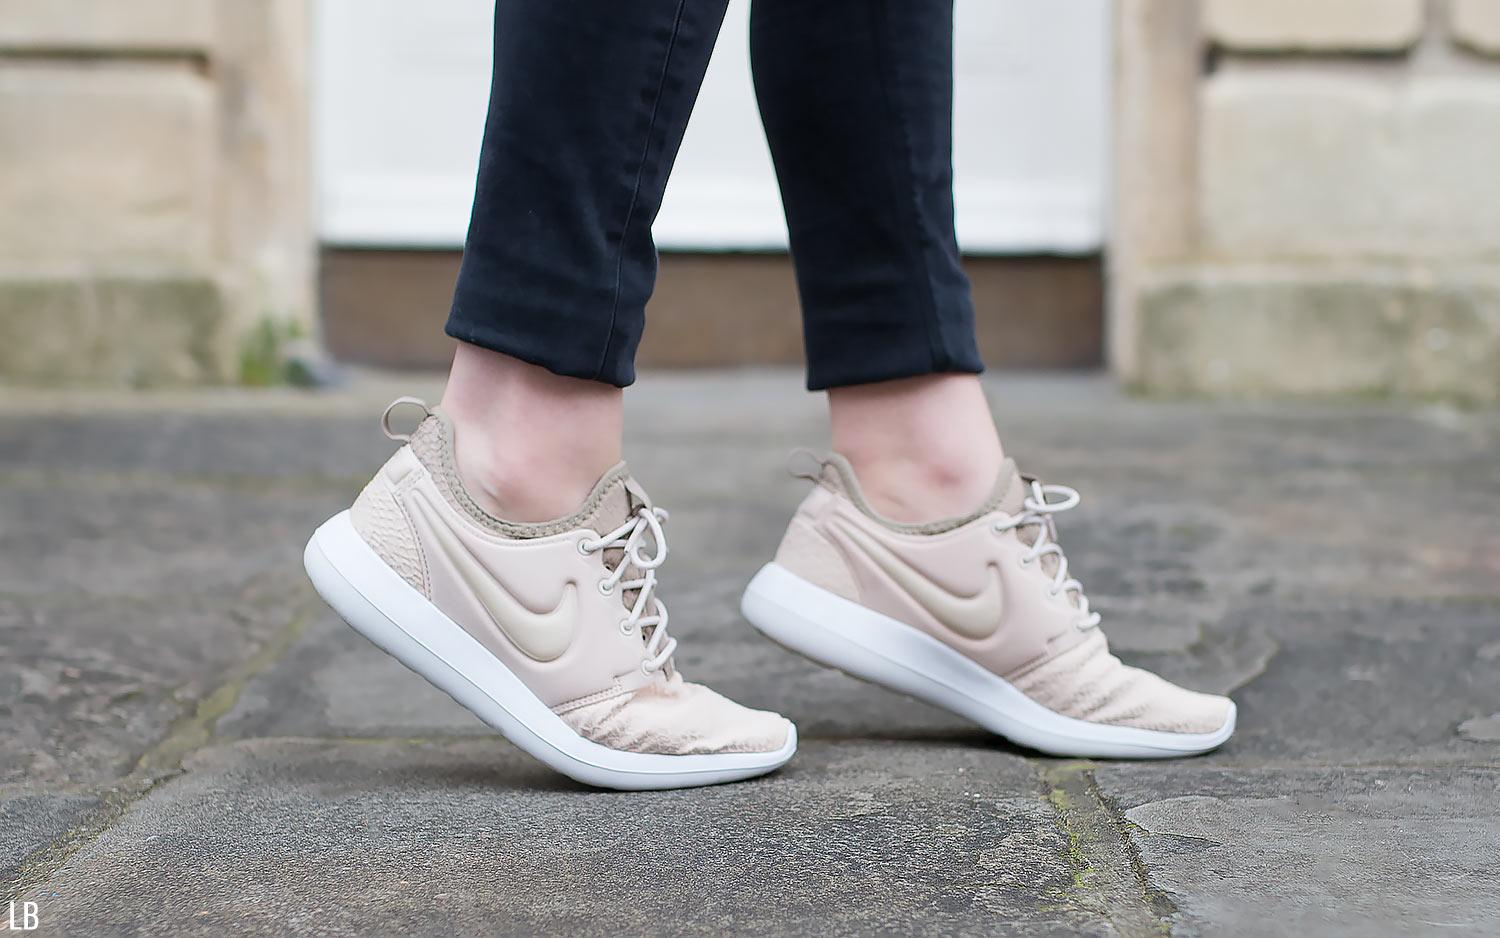 Majestuoso Generosidad Correspondiente My Nike Roshe Two SE Trainers in Oatmeal Review - Raindrops of Sapphire